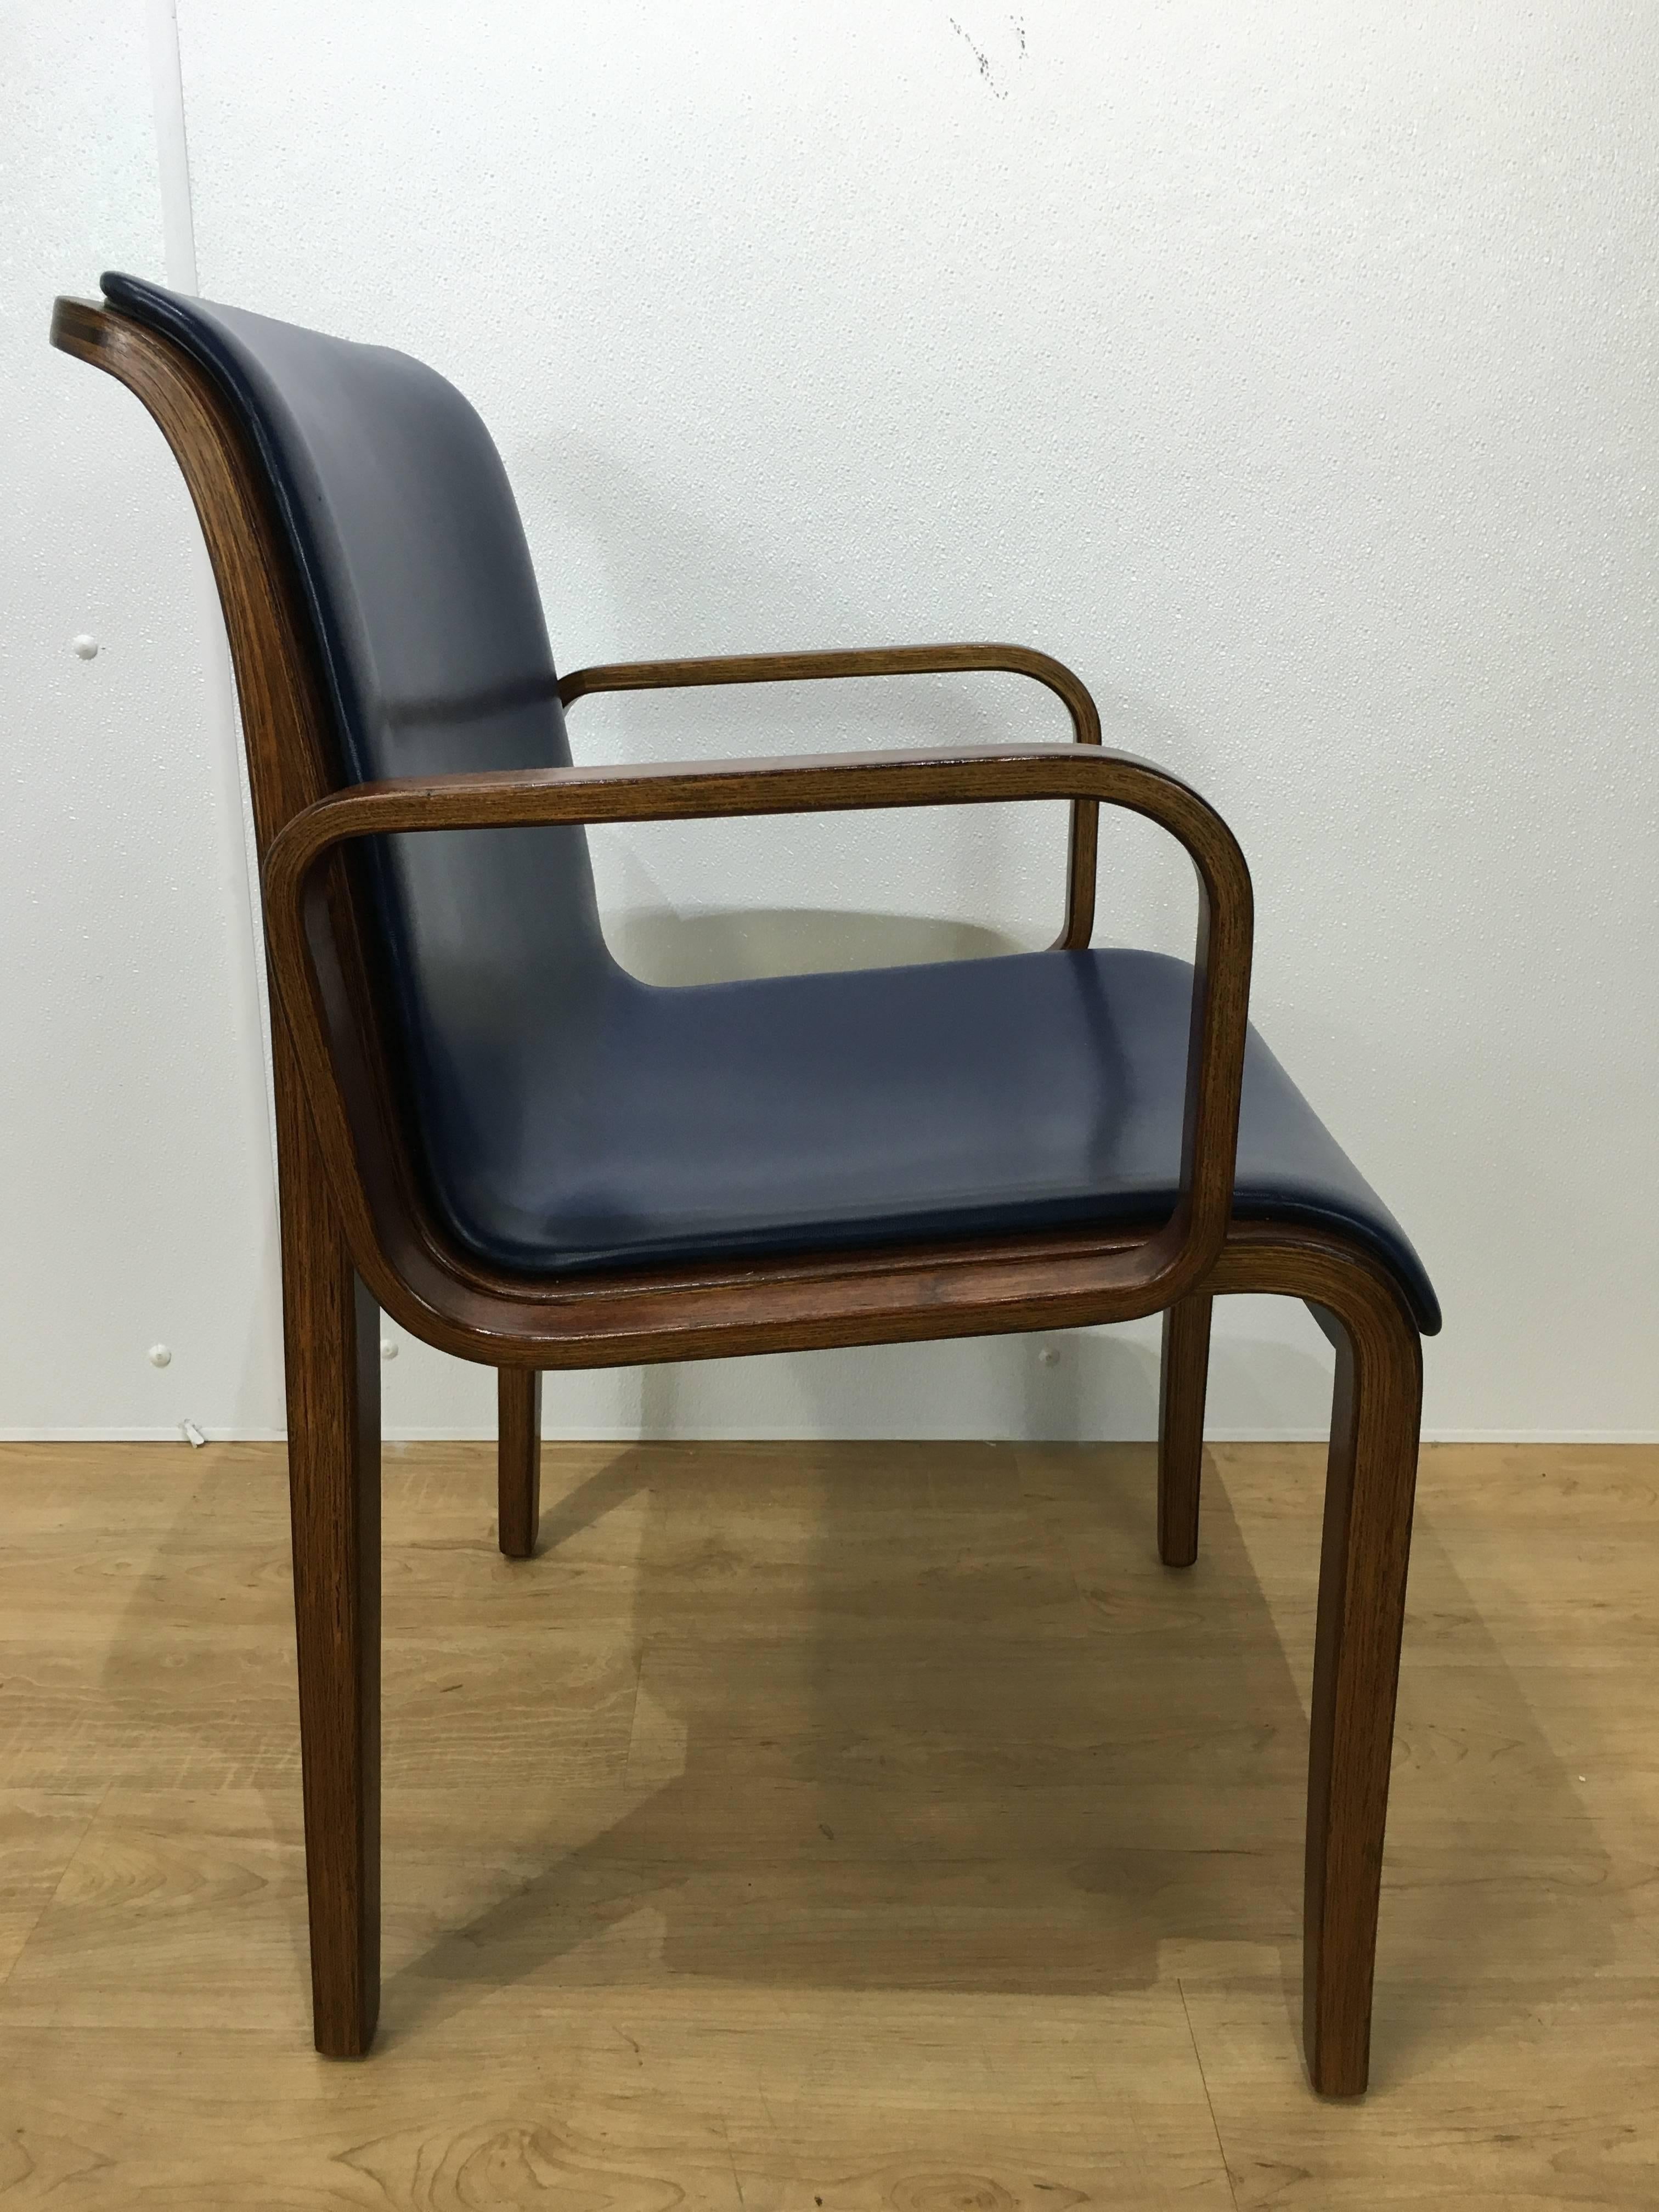 Bill Stephens for Knoll dining chair, bentwood and blue Naugahyde seats.